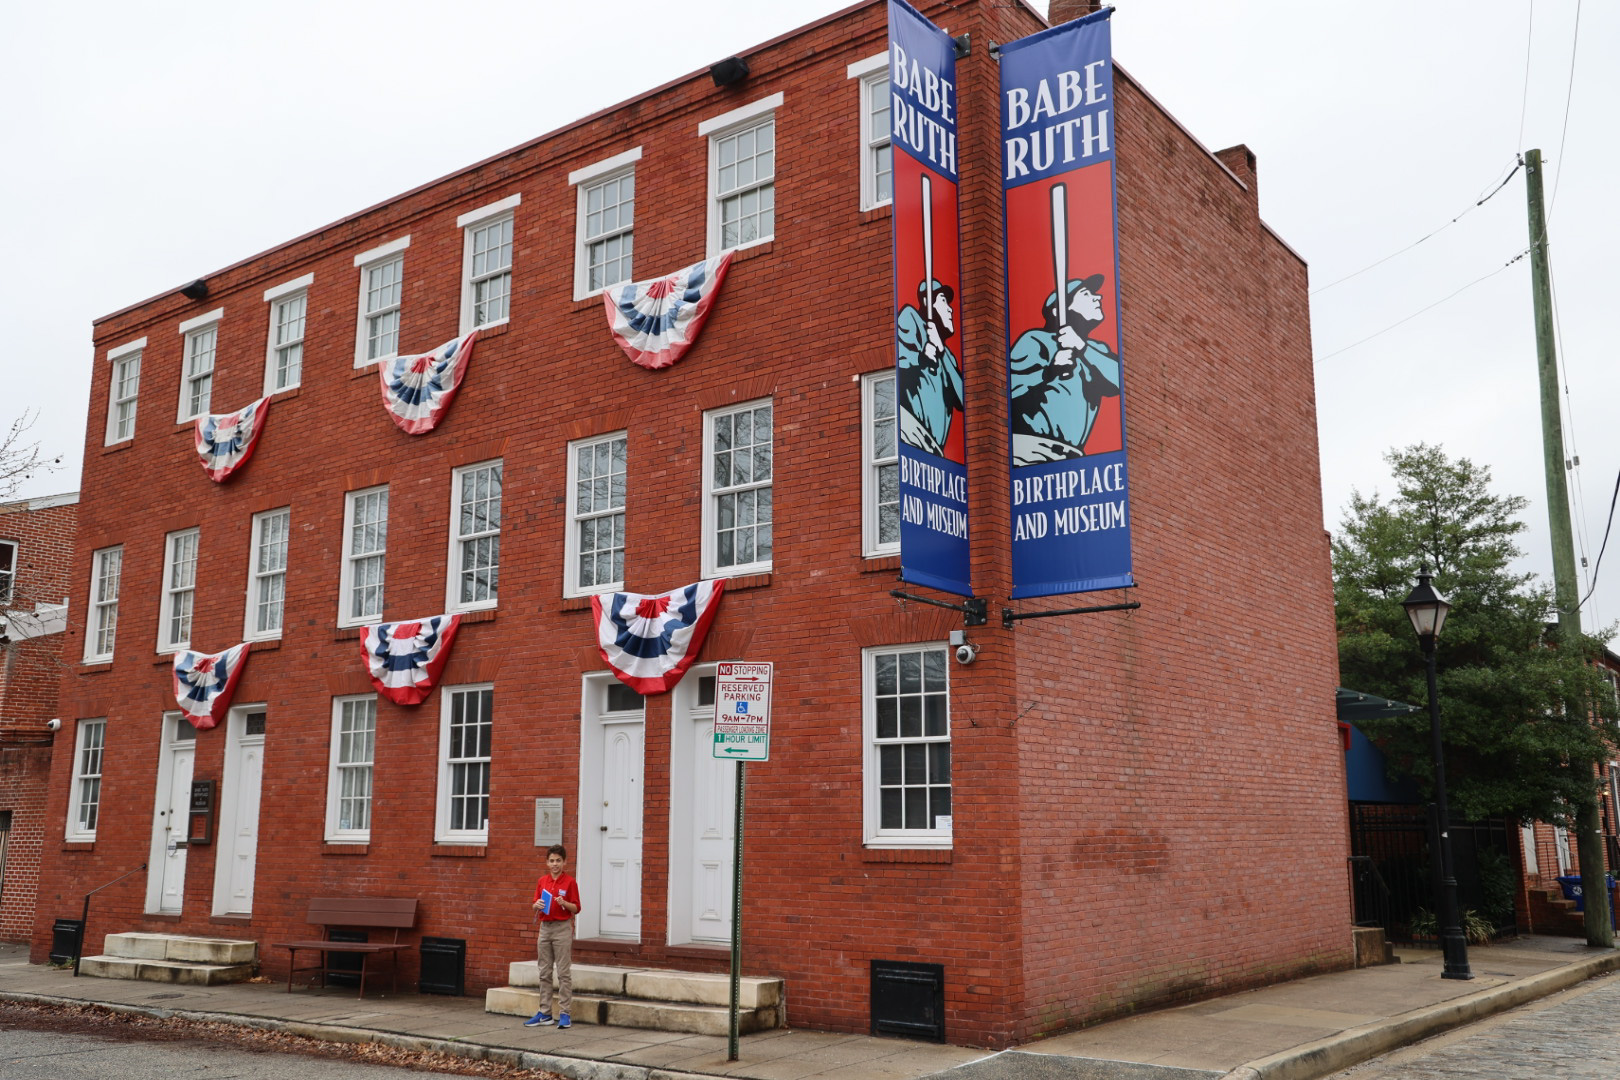 The Babe Ruth Birthplace Museum